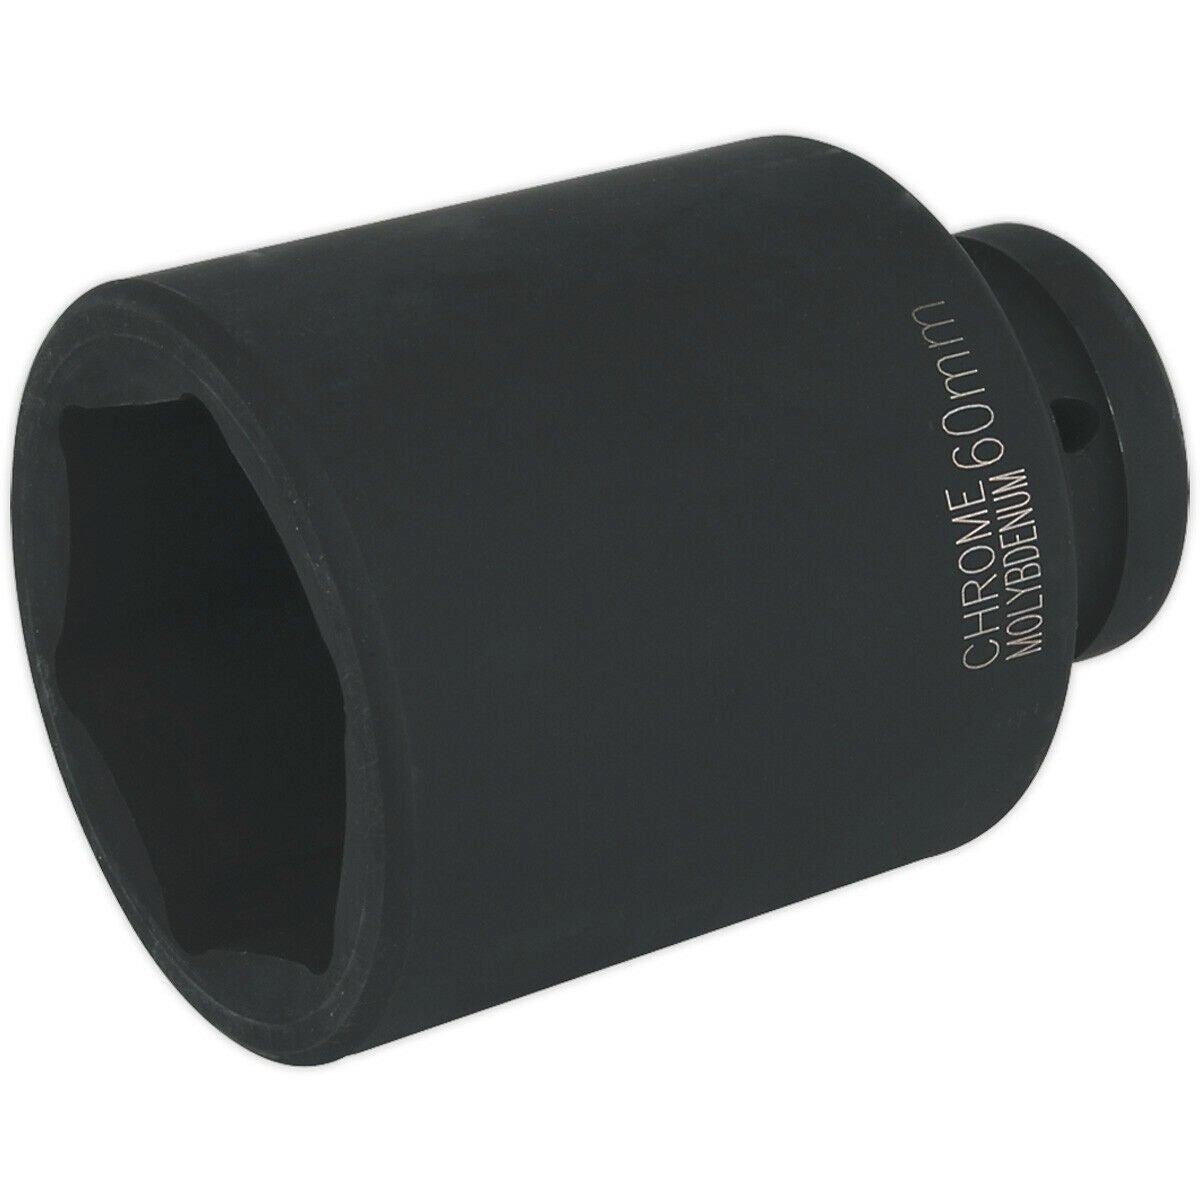 60mm Forged Deep Impact Socket - 1 Inch Sq Drive - Chromoly Wrench Socket